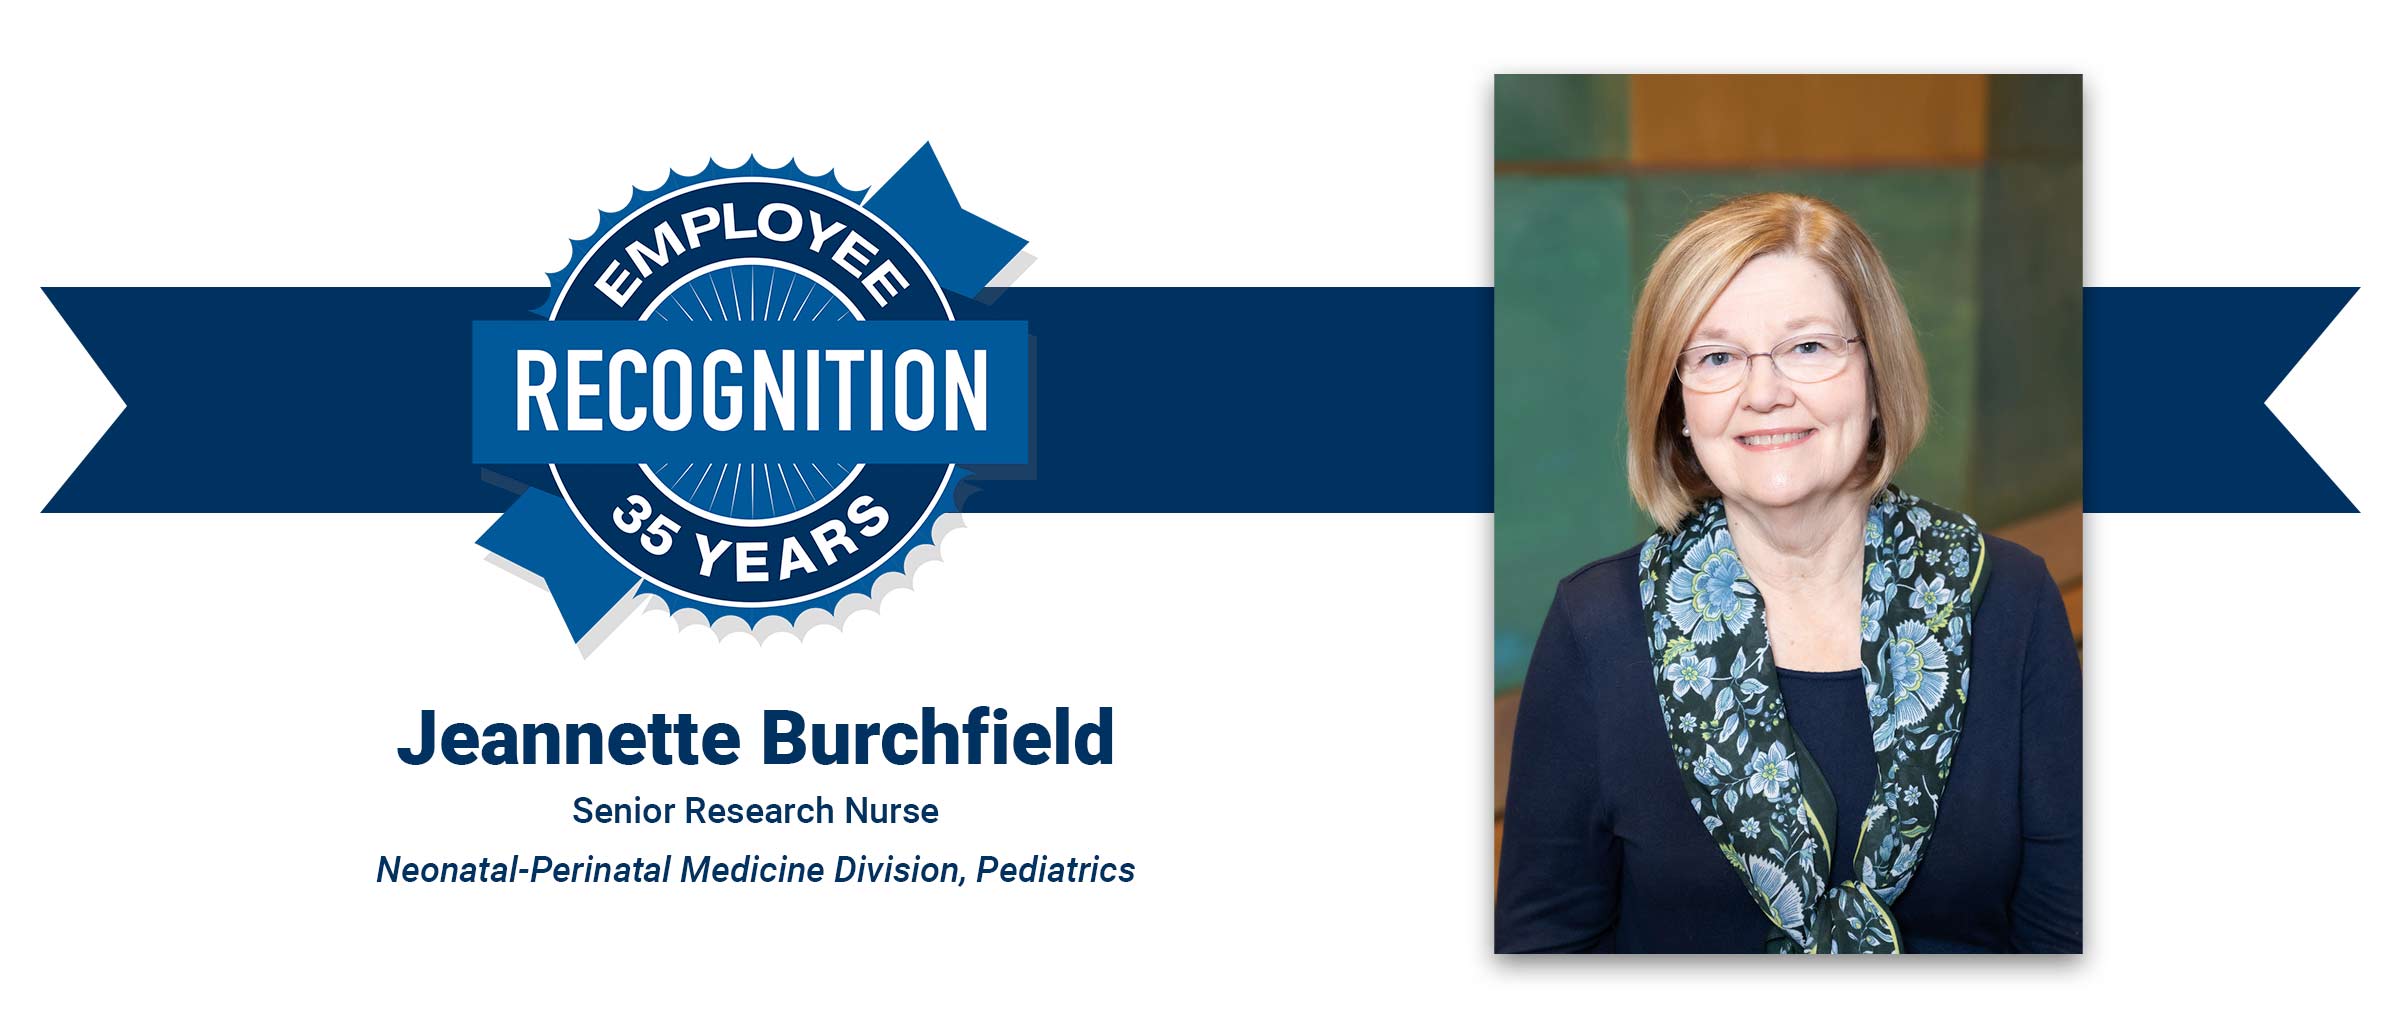 Employee Recognition 35 years badge, Jeanette Burchfield, photo of woman with short blond hair, glasses, blue jacket